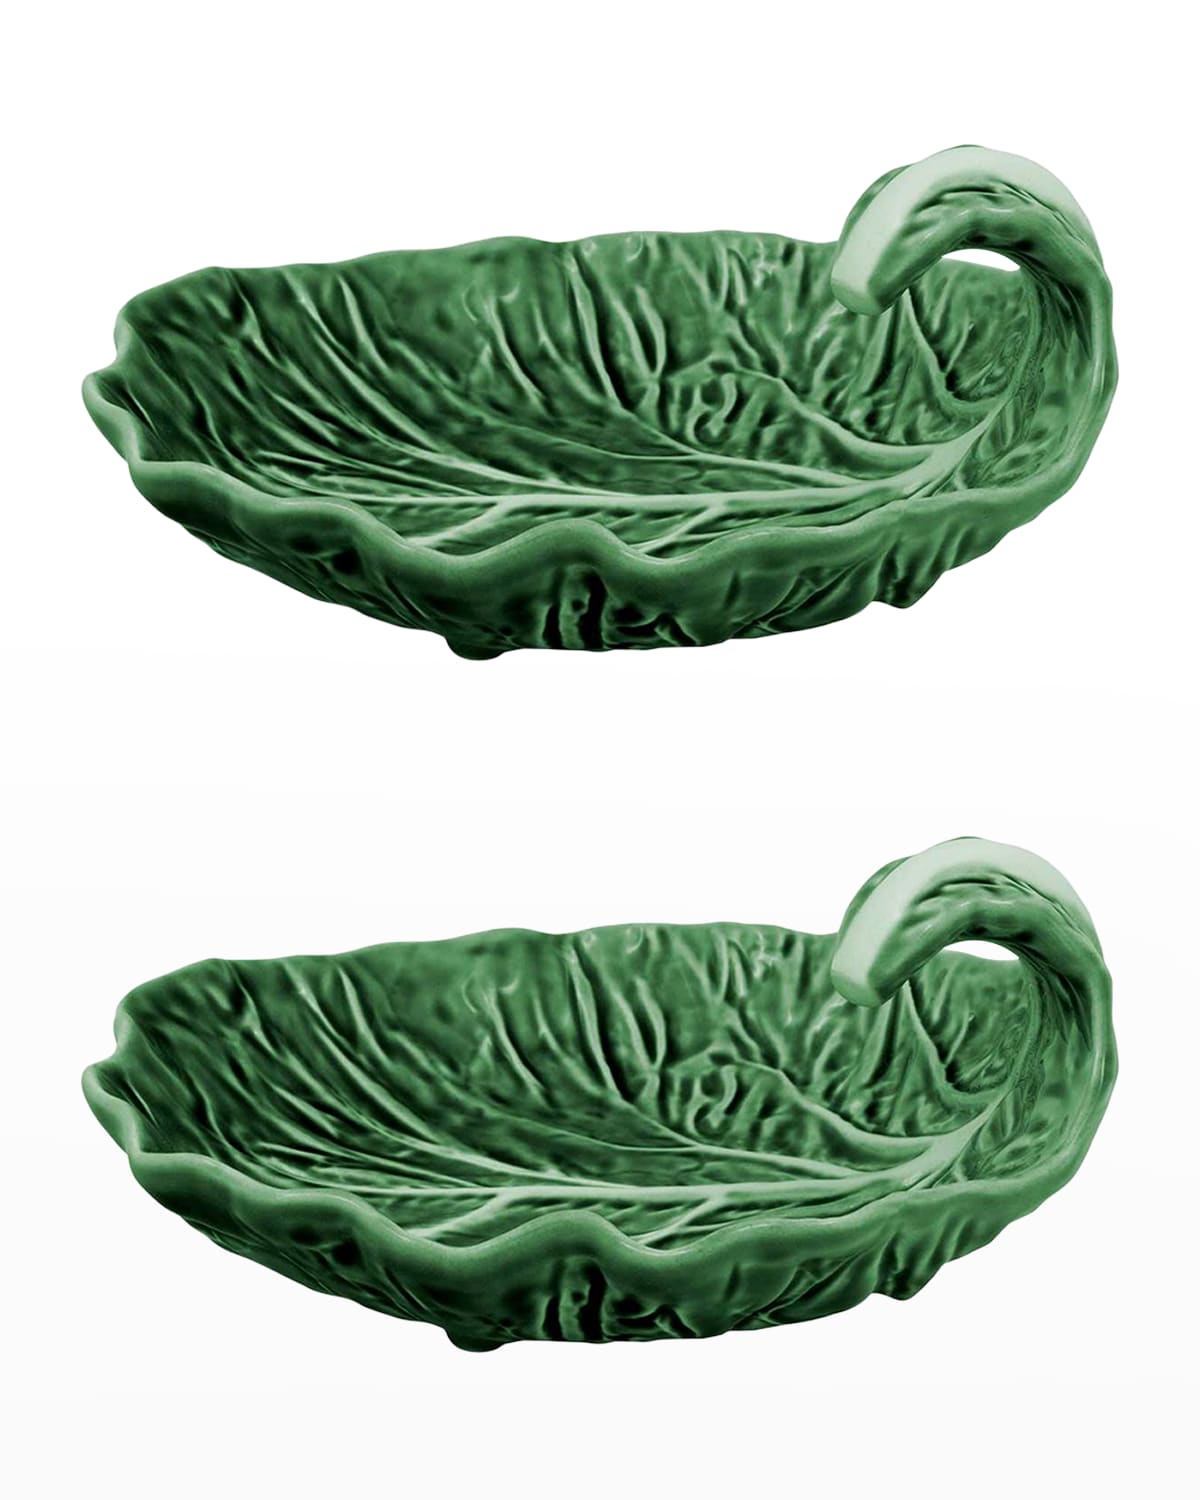 Cabbage Leaf Serving Bowl with Curvature, Green - Set of 2